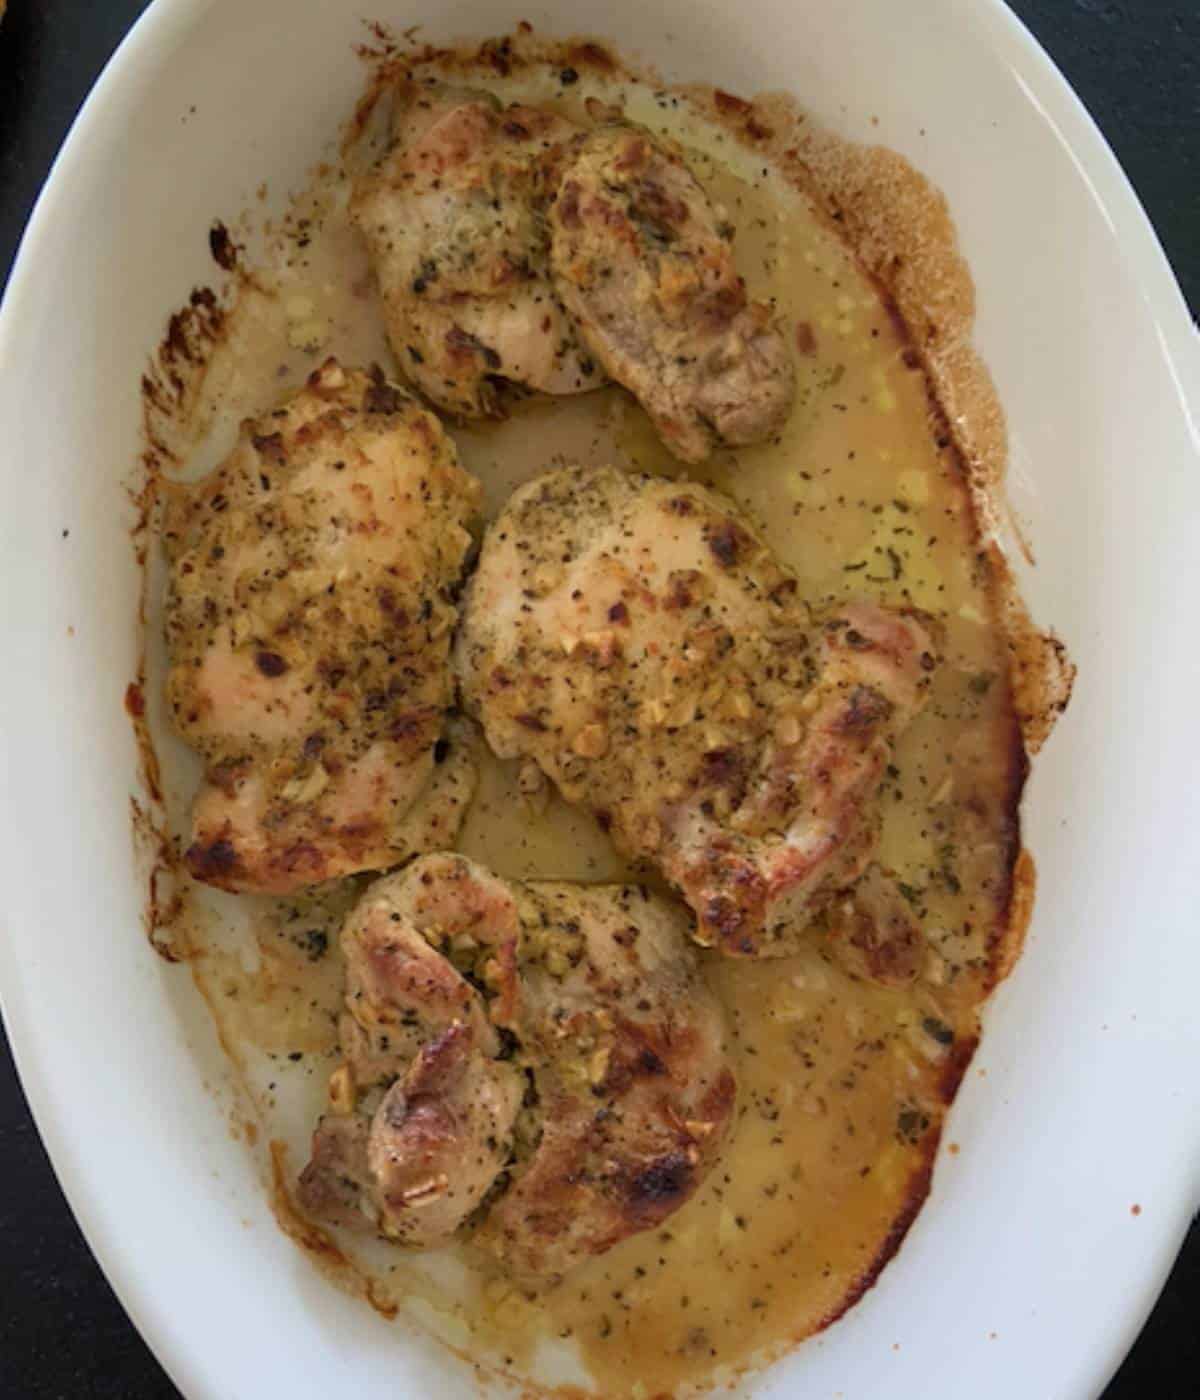 Chicken thighs just pulled out of the oven.